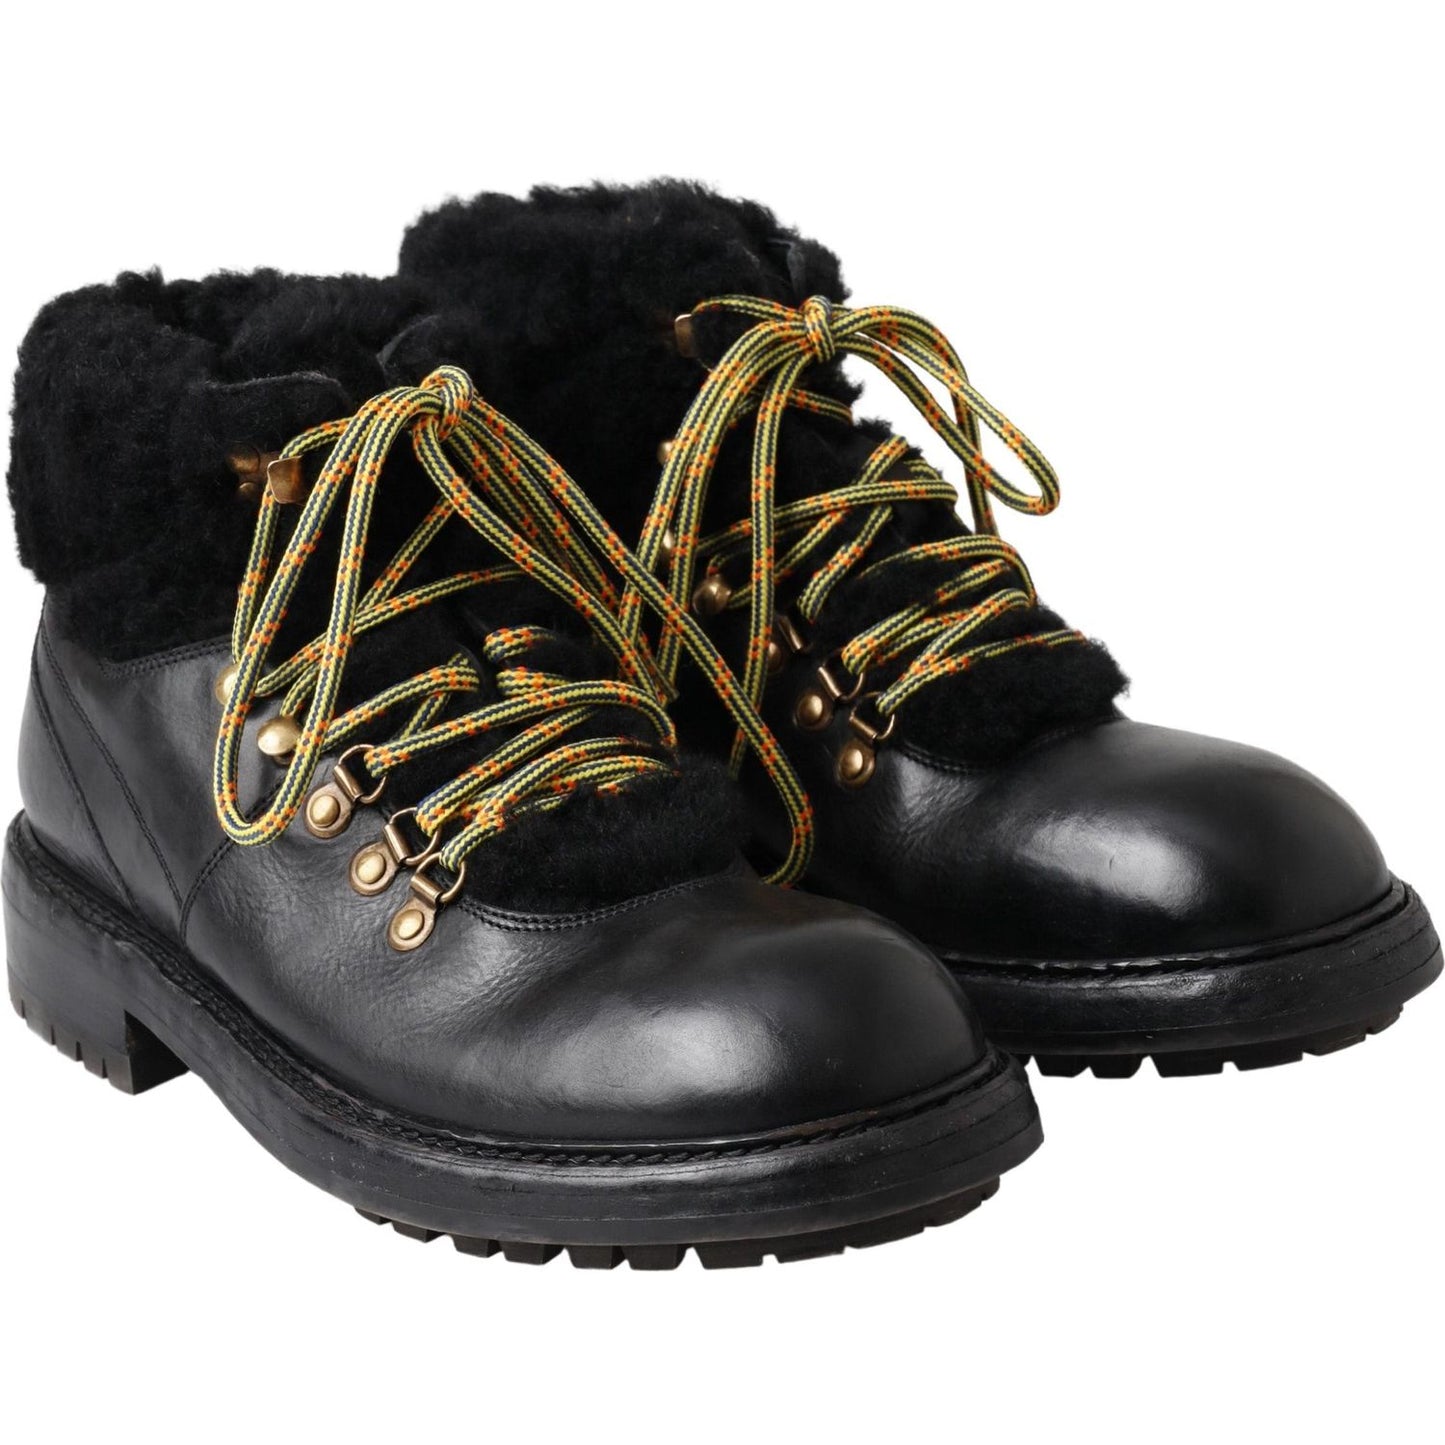 Dolce & Gabbana Elegant Shearling Style Men's Leather Boots black-leather-bernini-shearling-boots-shoes